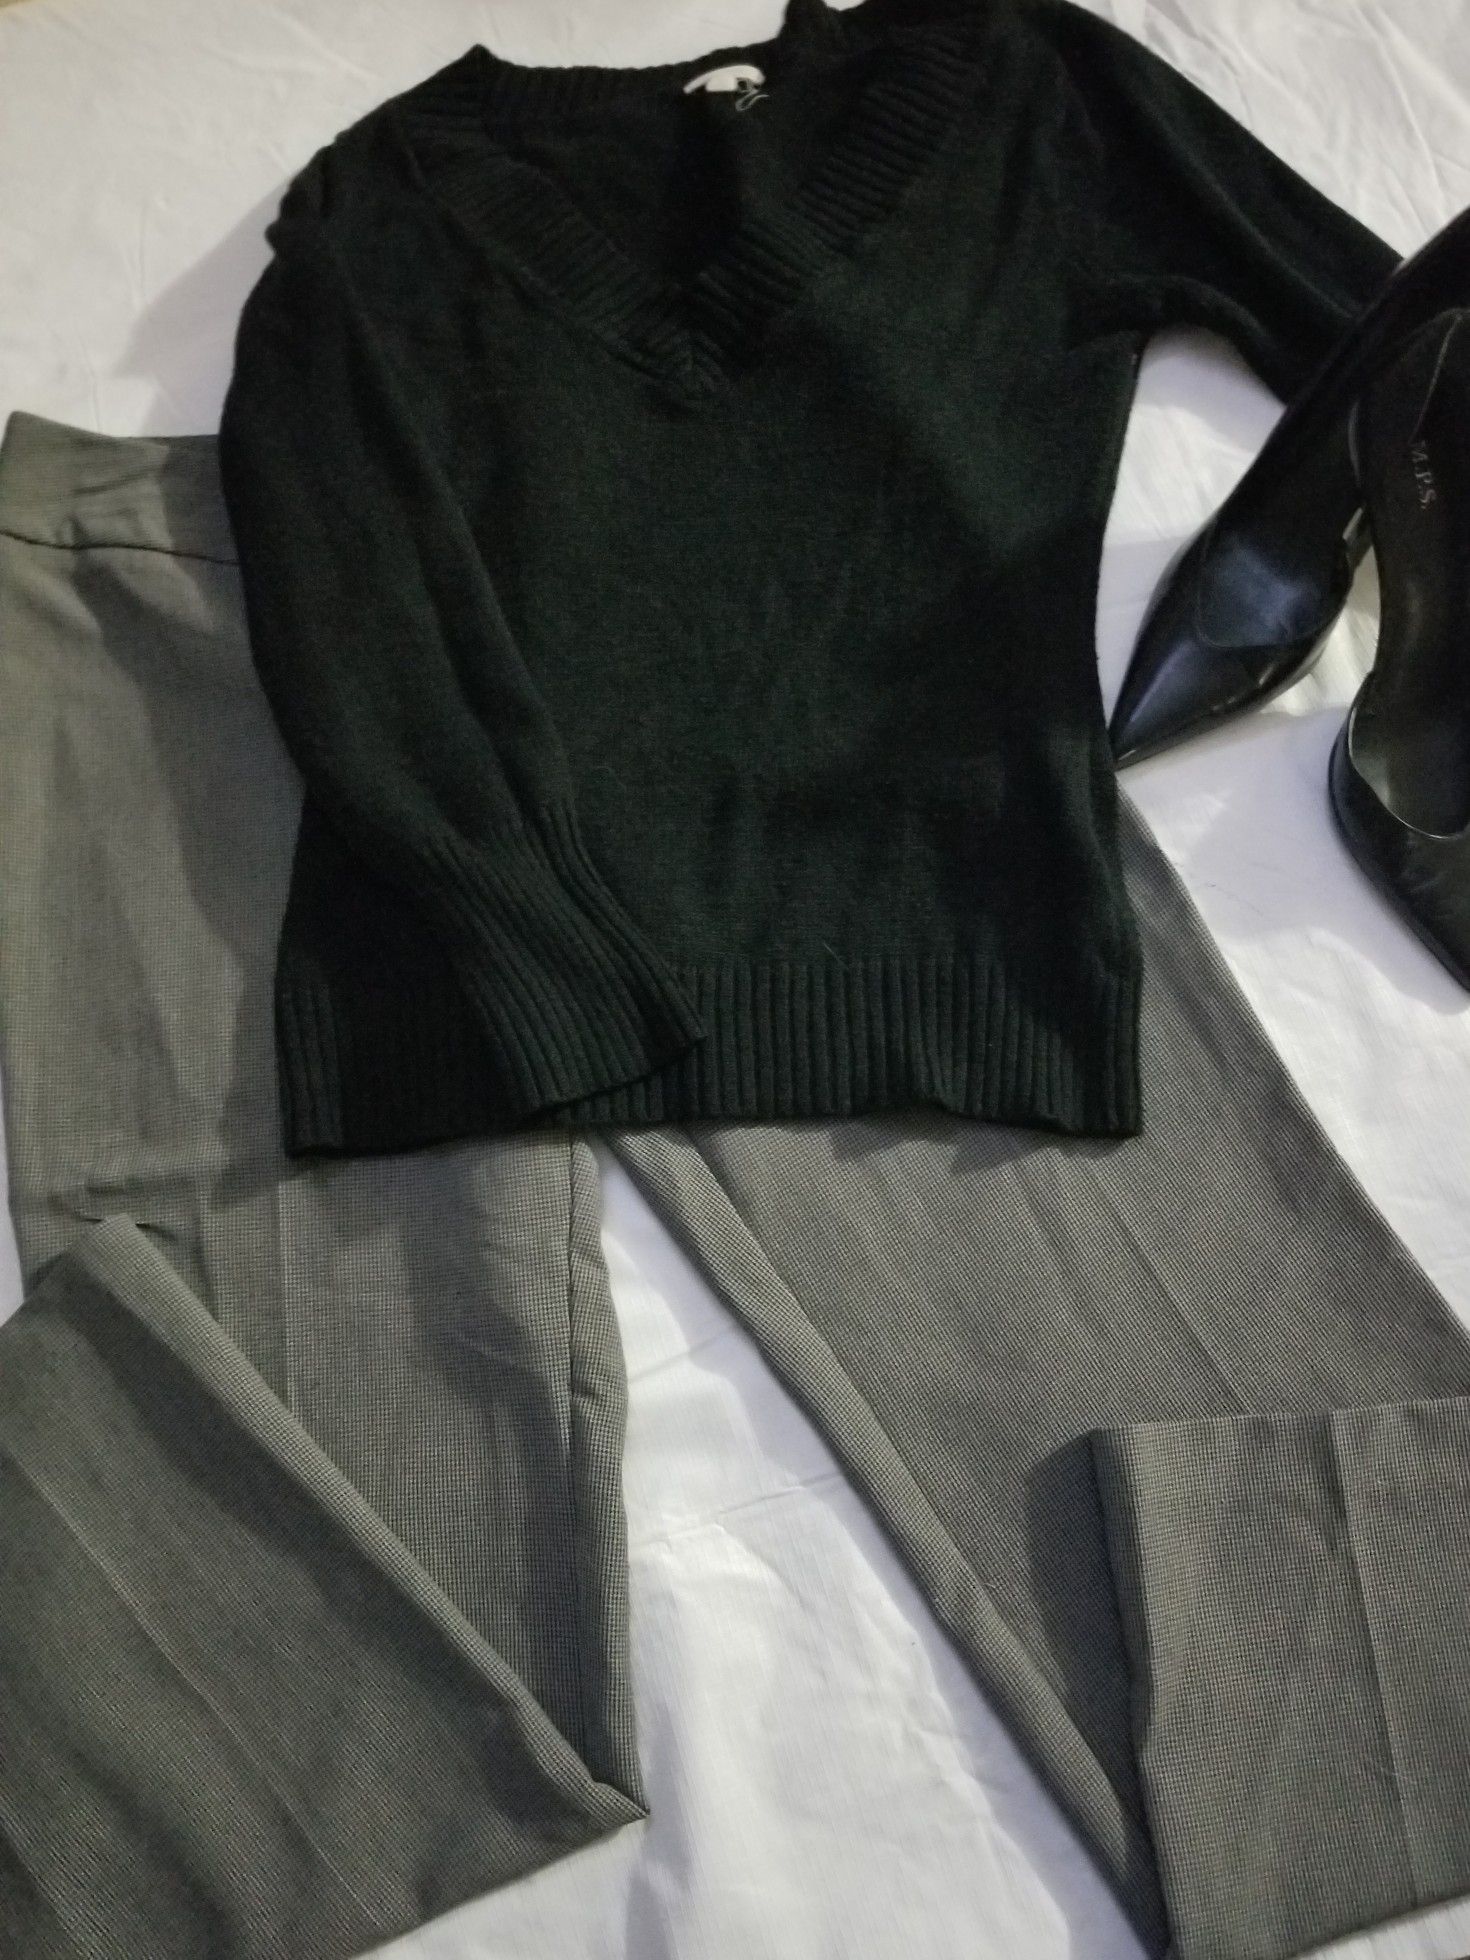 $8 Pants size 12P and sweater size large